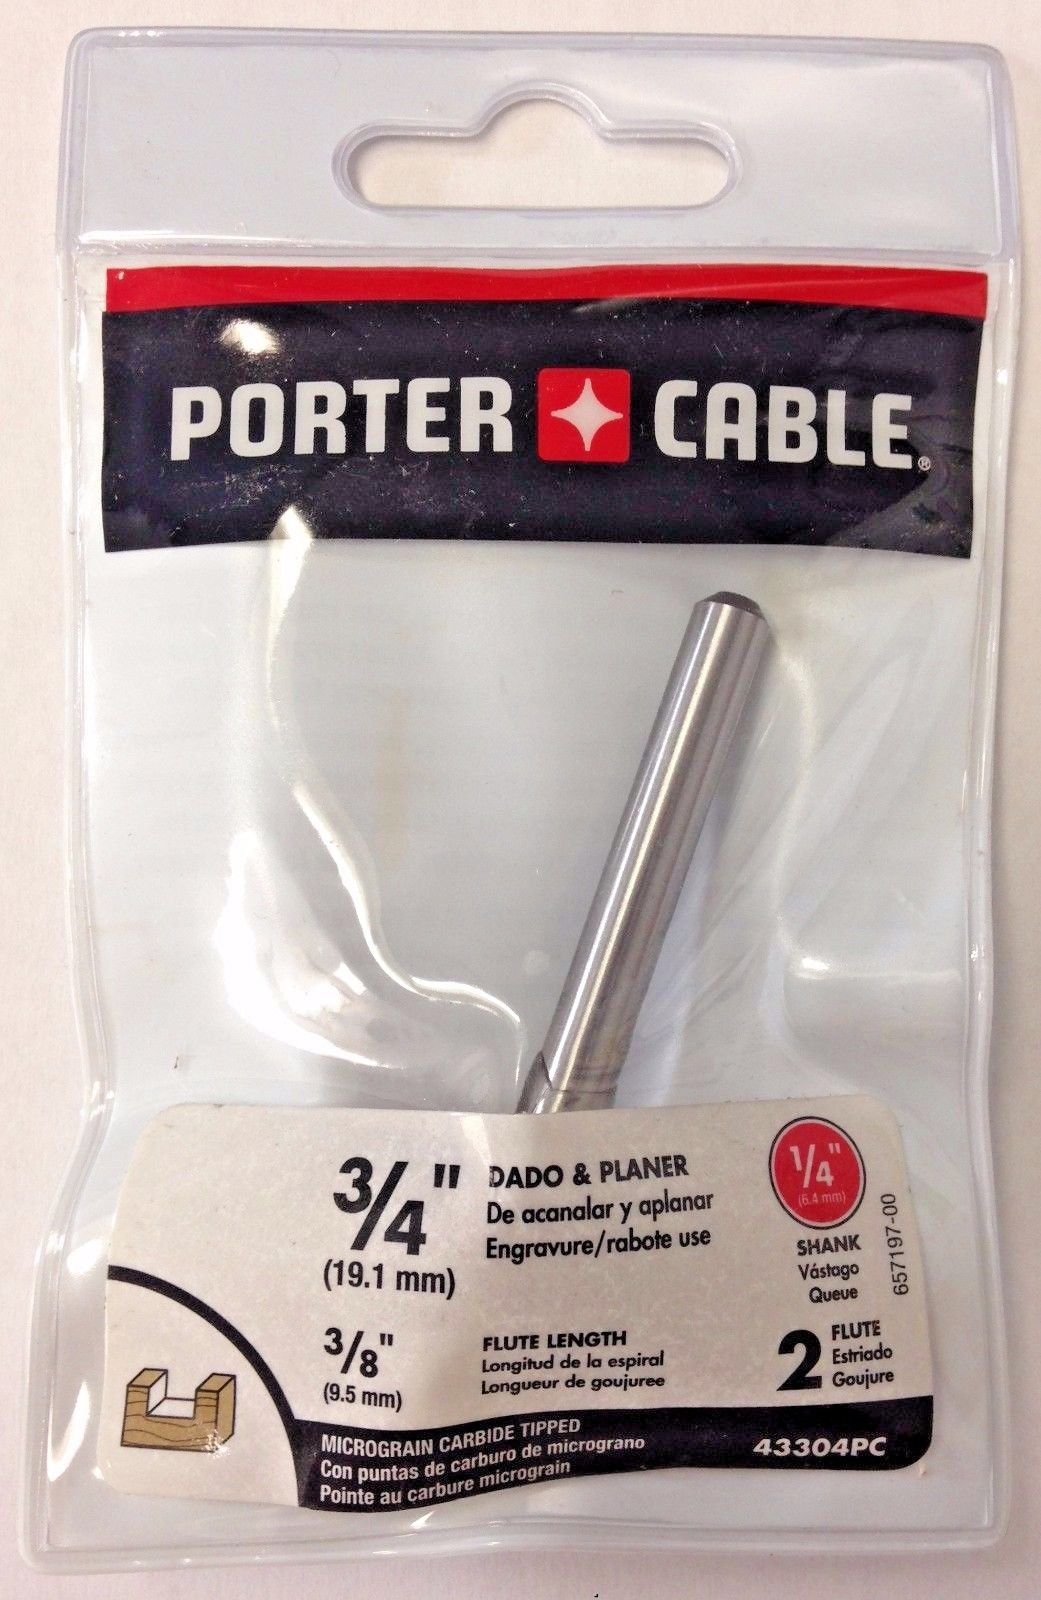 Porter Cable 43304PC 3/4" Dado & Planer Two Flute Router Bit 1/4" Shank